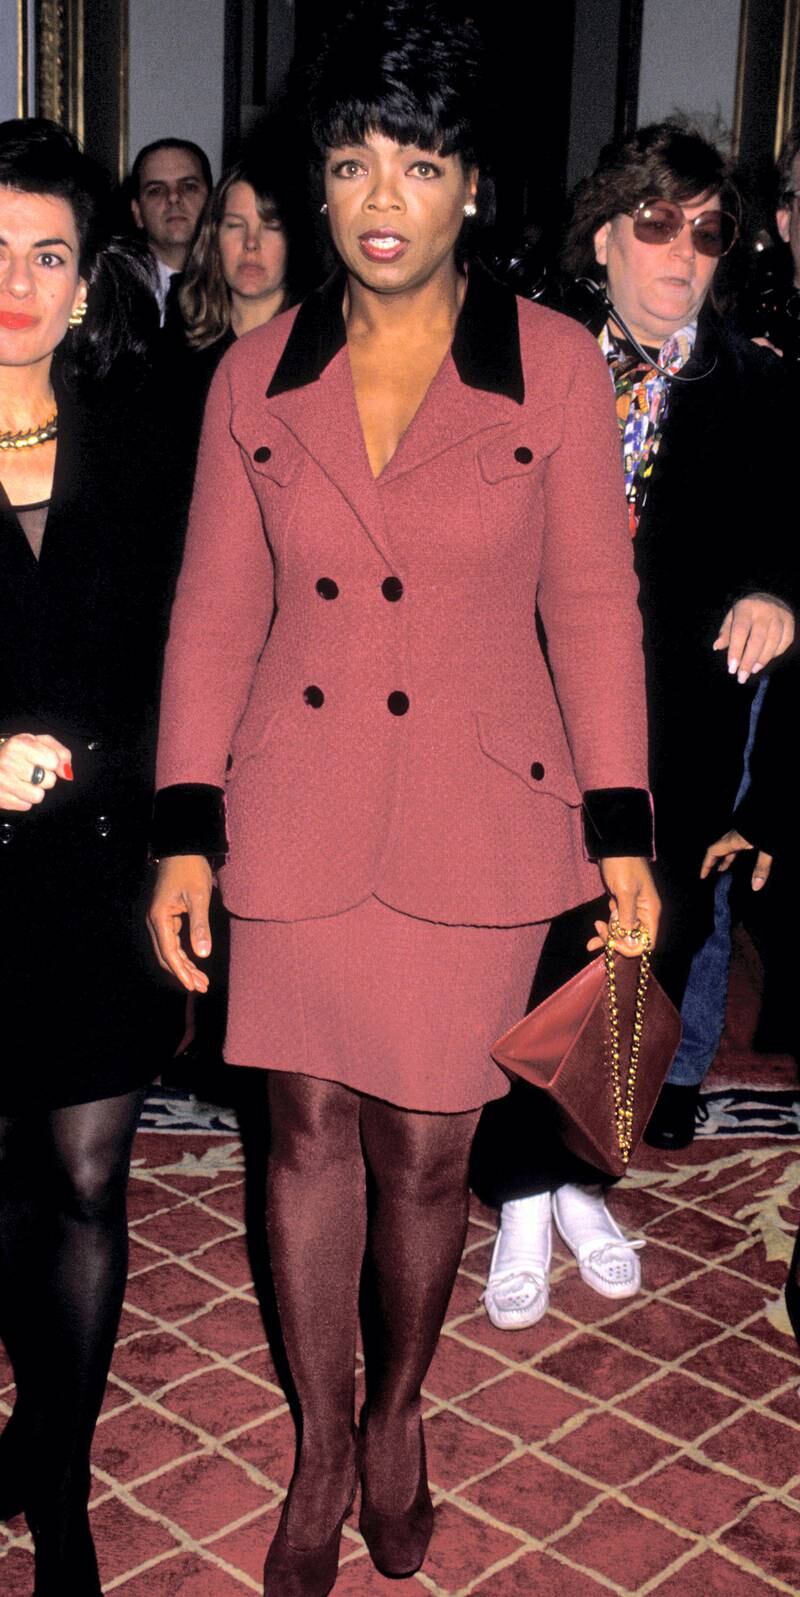 Oprah Winfrey attends "One Smart Lady" Ladies Home Journal Awards Honoring Oprah Winfrey on November 11, 1994 at the Plaza Hotel in New York City. (Photo by Ron Galella, Ltd./Ron Galella Collection via Getty Images)